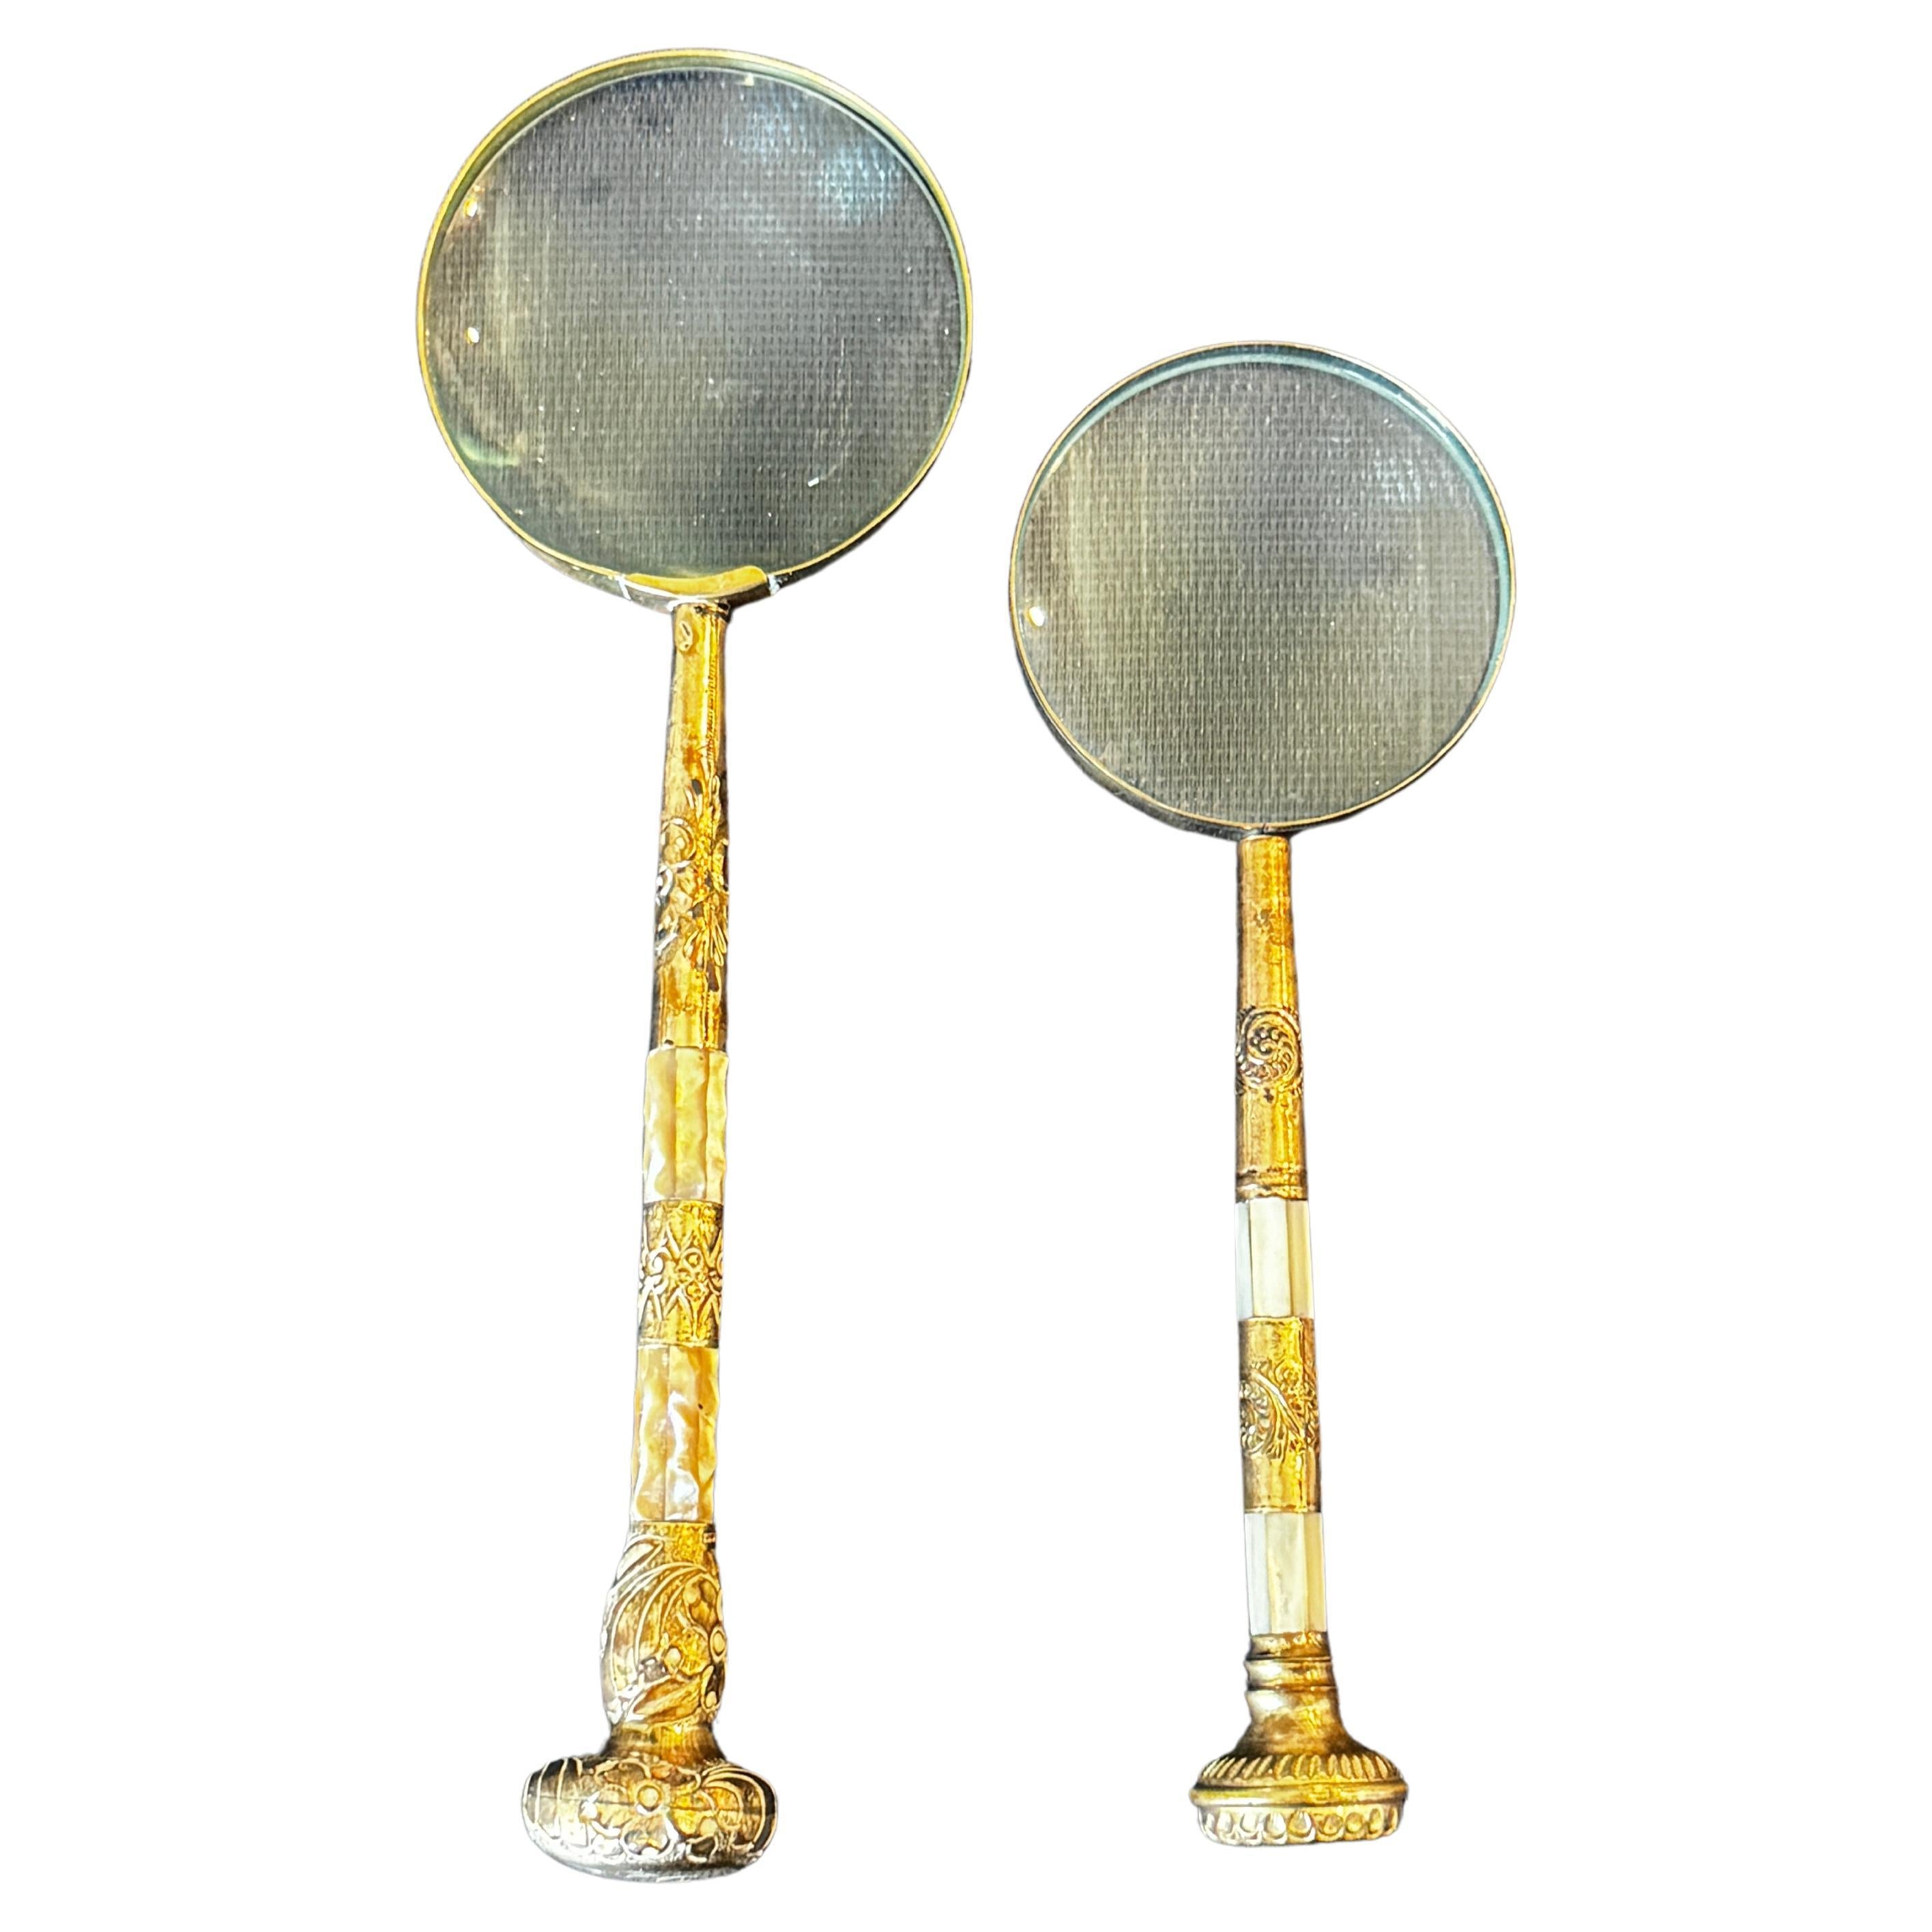 Two Large Magnifiers With 19th Century Gilded and Mother-of-Pearl Handles